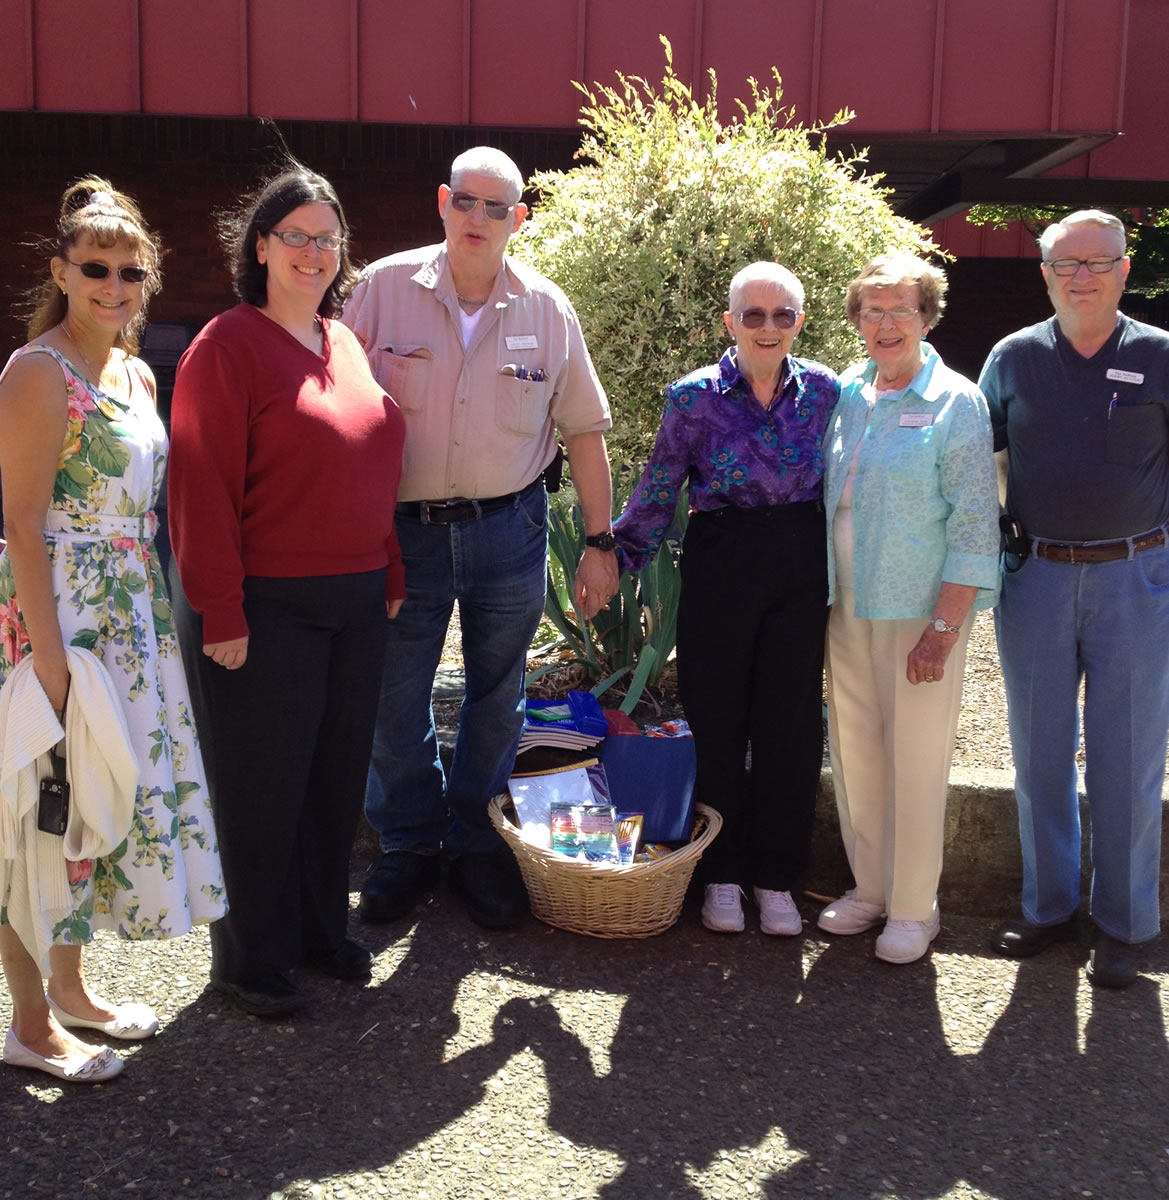 Mountain View: The Sunshine Ambassadors from The Bedford Independent Retirement Community collected school supplies for students at Wyieast Middle School.